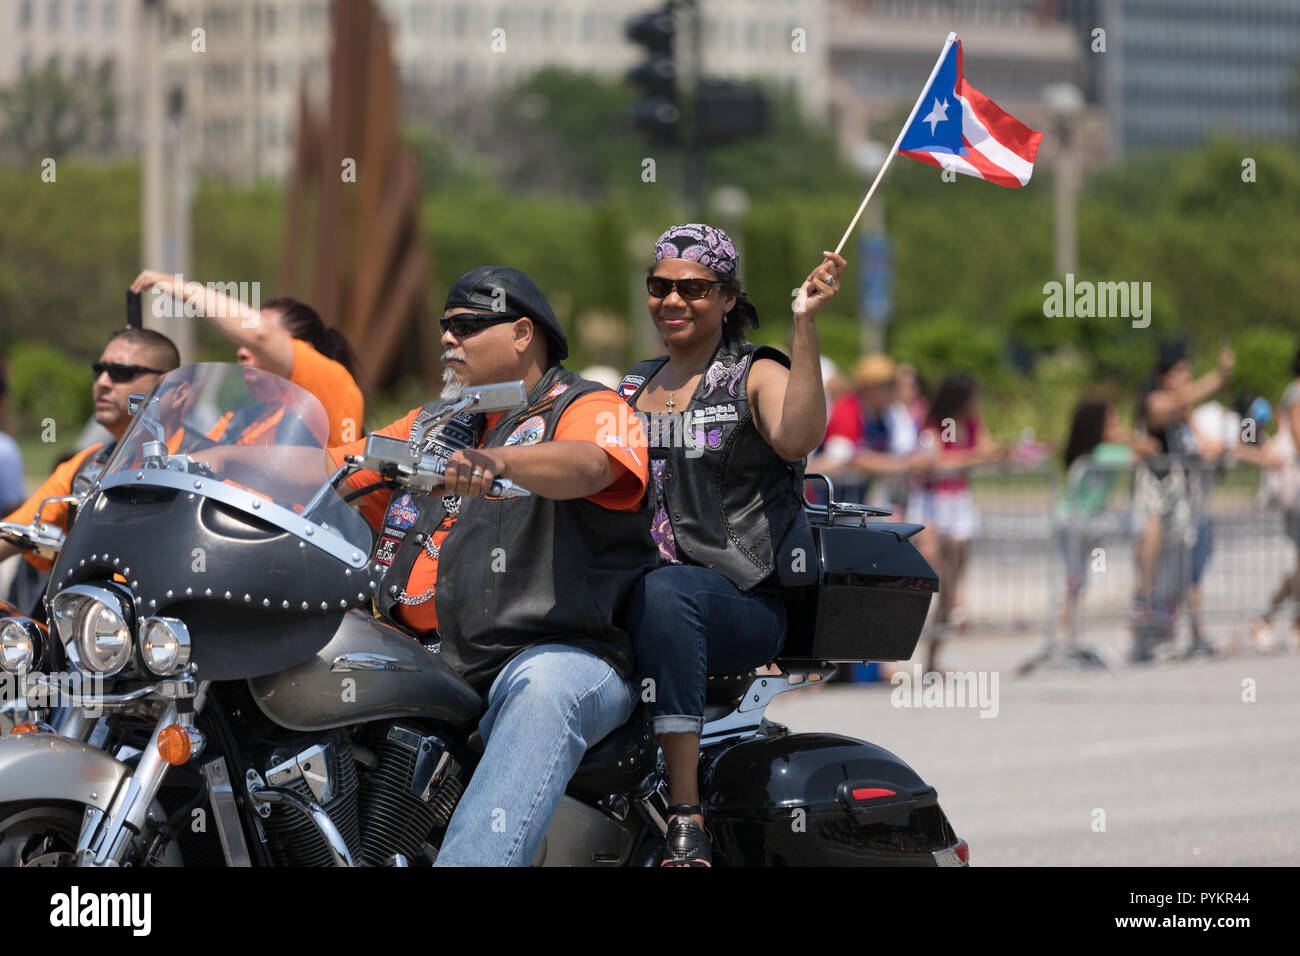 Chicago, Illinois, USA - June 16, 2018: The Puerto Rican Day Parade, Members of the PUERTO RICO MOTORCYCLE ASSOCIATION INC. riding motorcycles with th Stock Photo